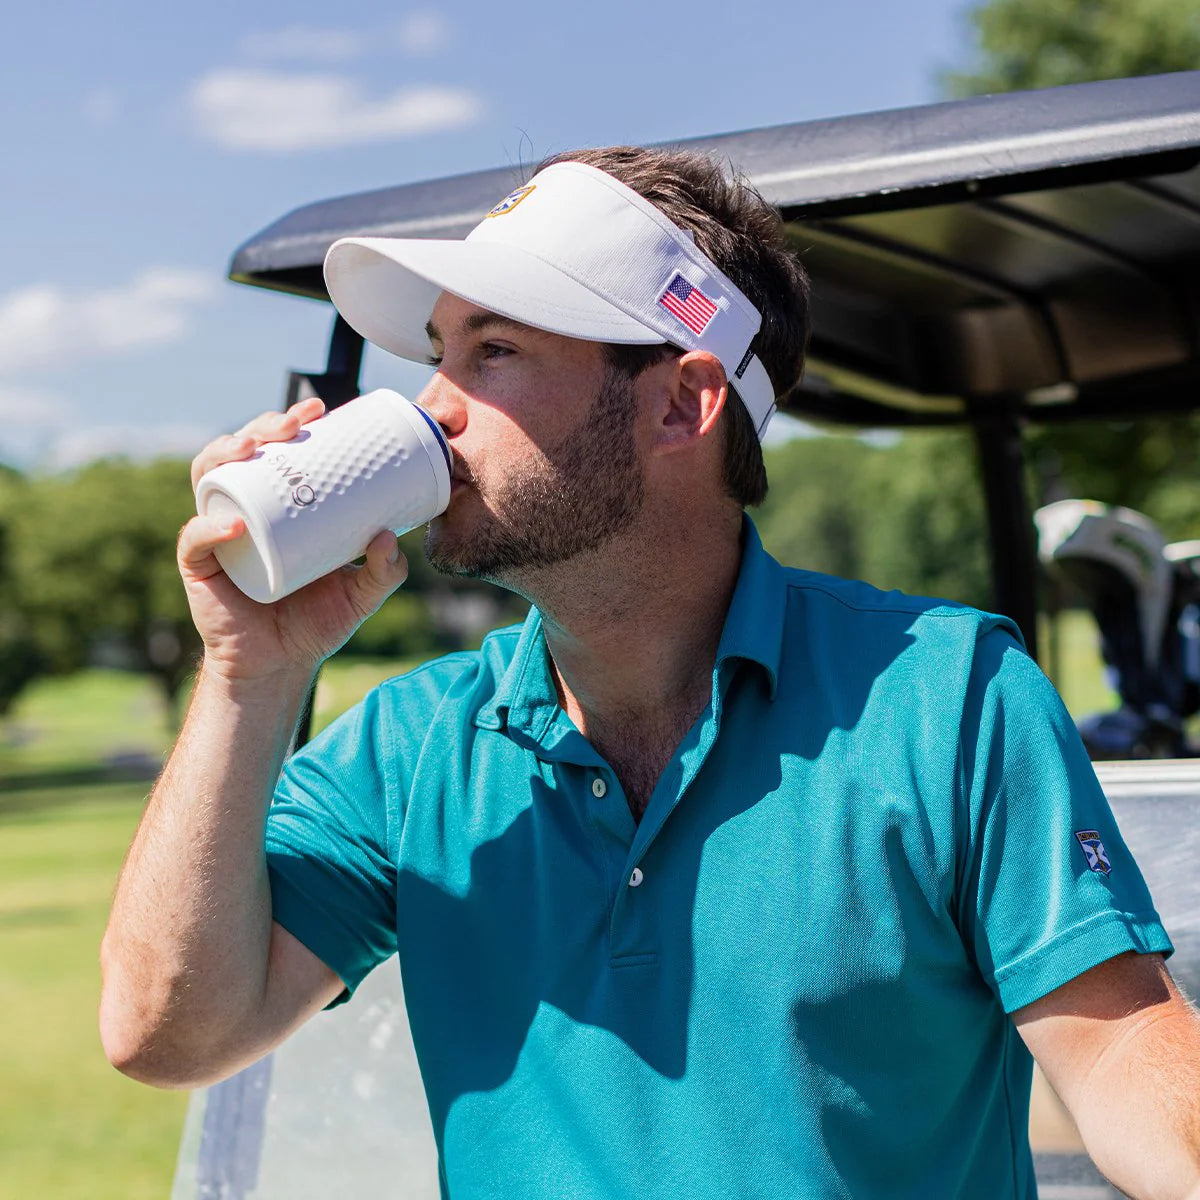 https://cdn.shopify.com/s/files/1/0110/8934/6622/products/swig-life-signature-12oz-combo-can-cooler-golf-partee-lifestyle_1800x1800.webp?v=1680909404